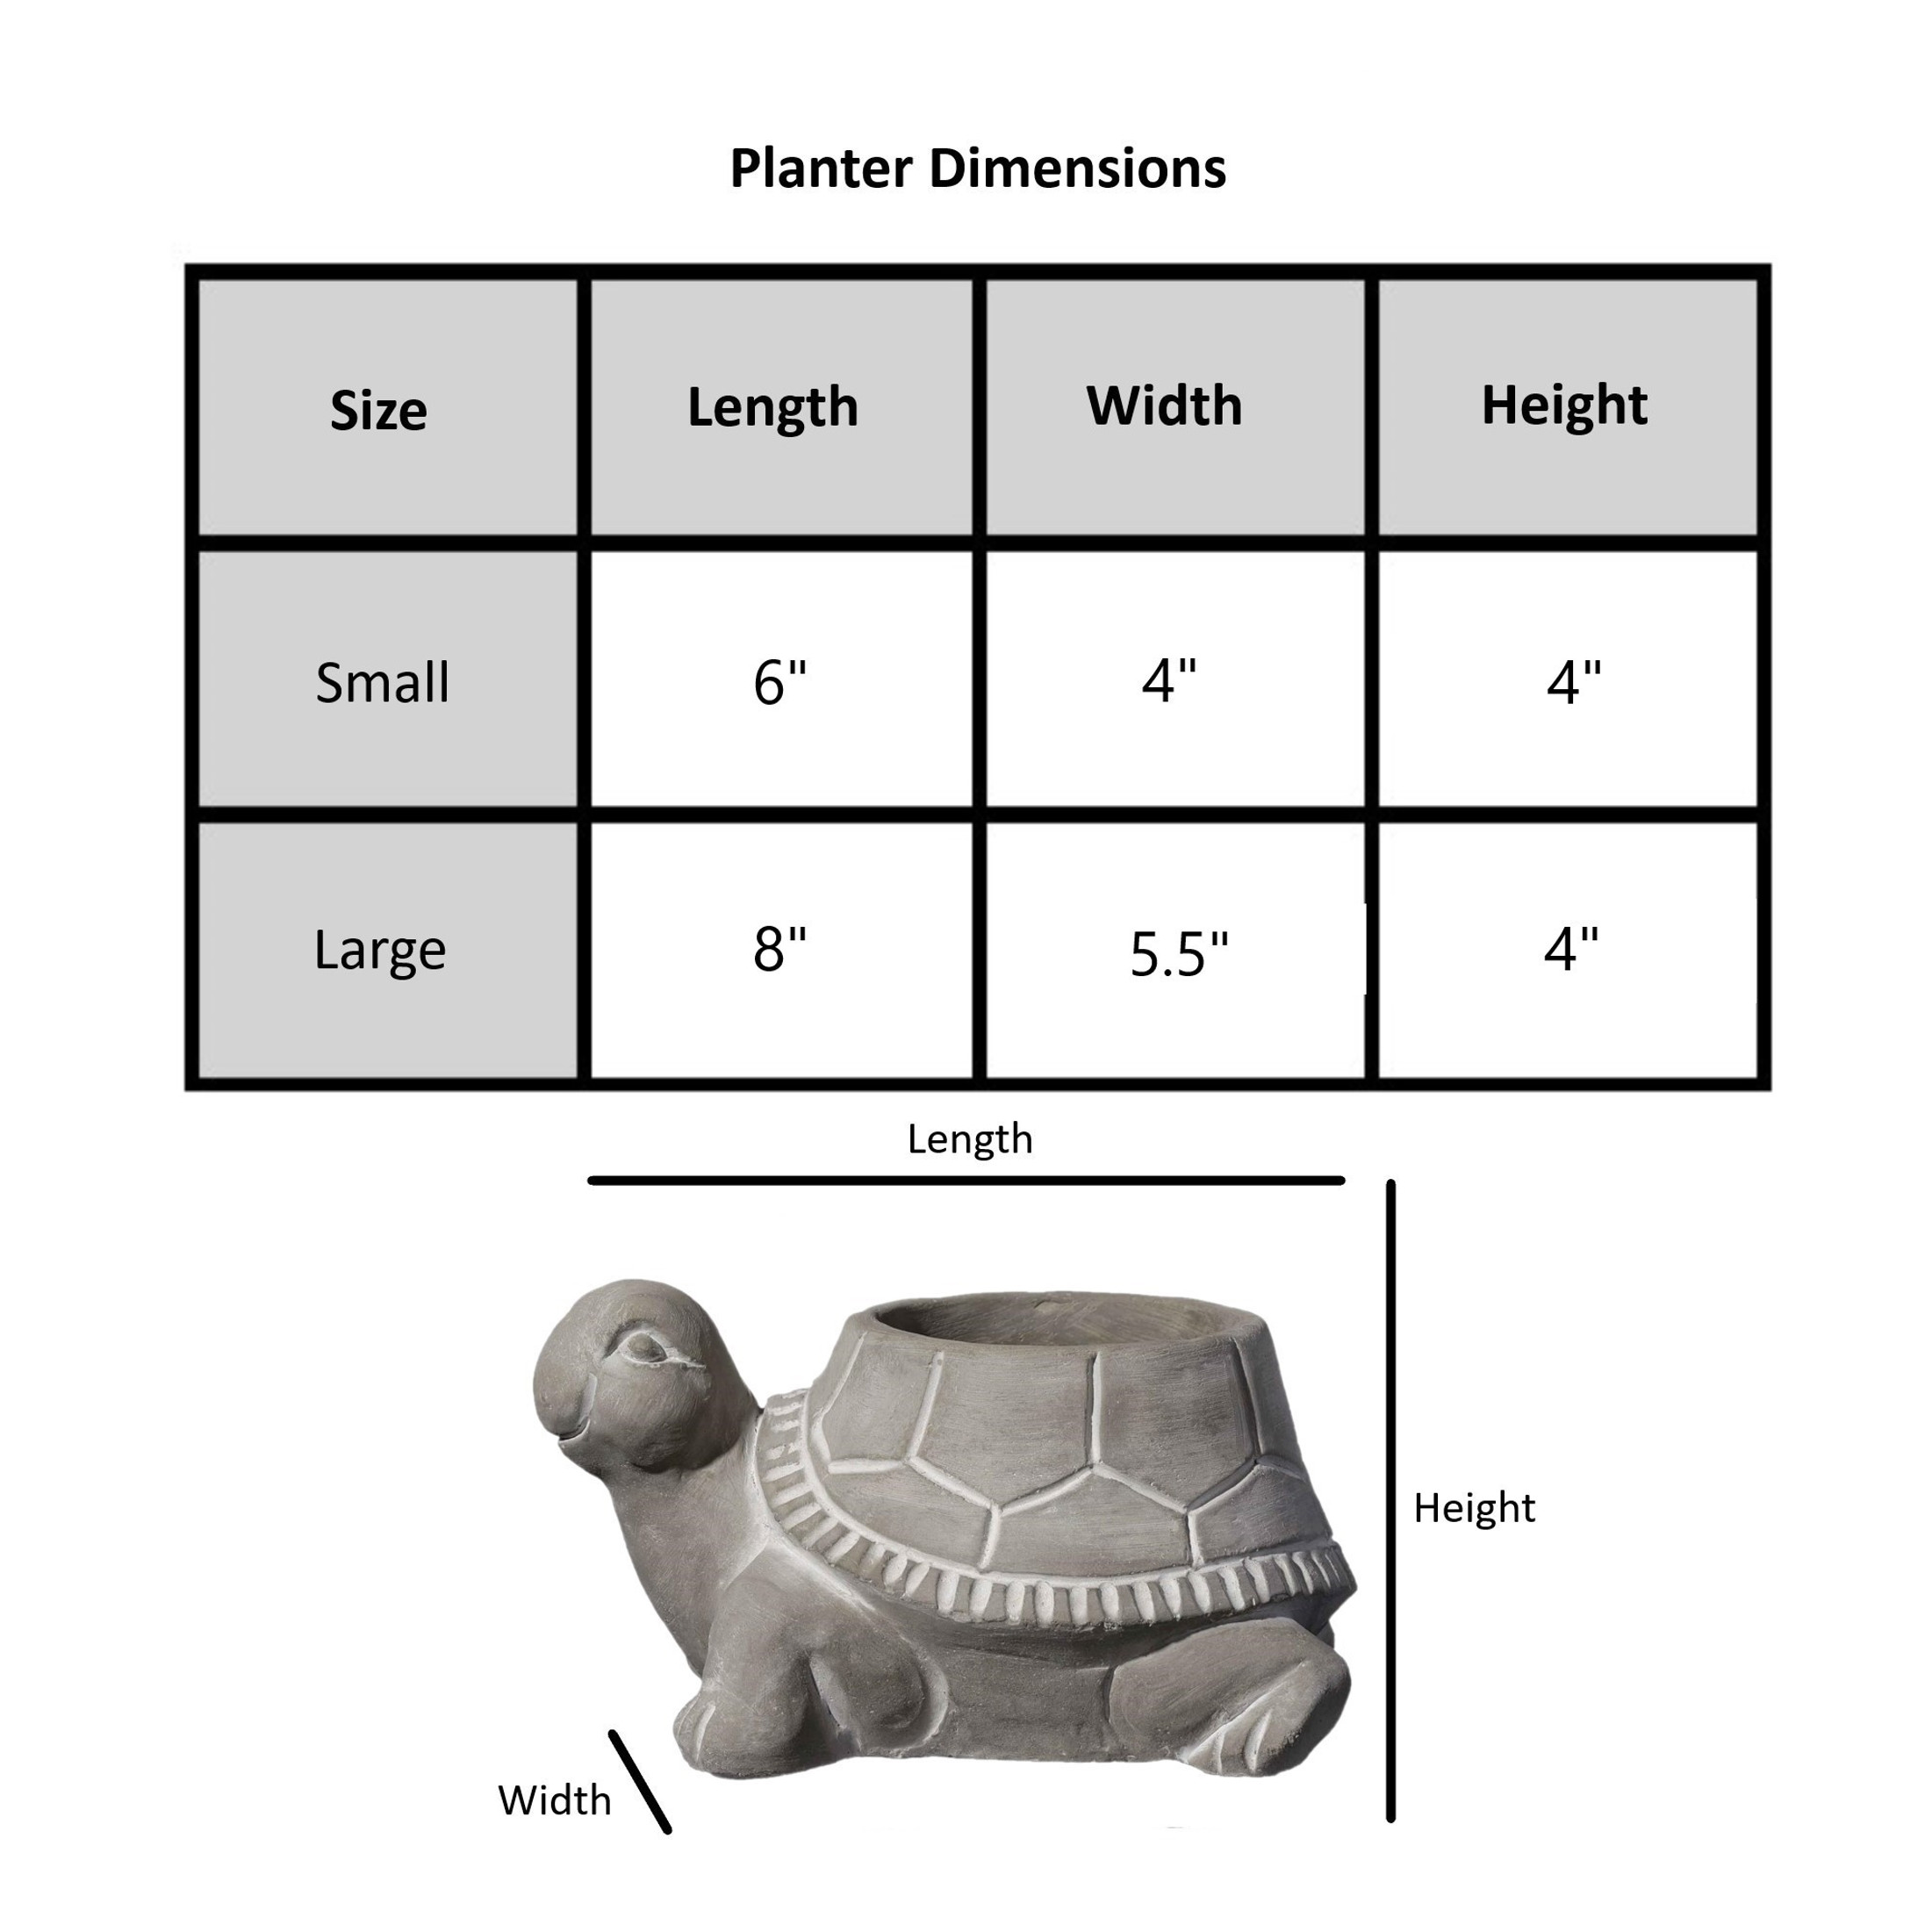 Classic Home and Garden Cement Buddies Indoor Outdoor Turtle Planter with Drainage Hole